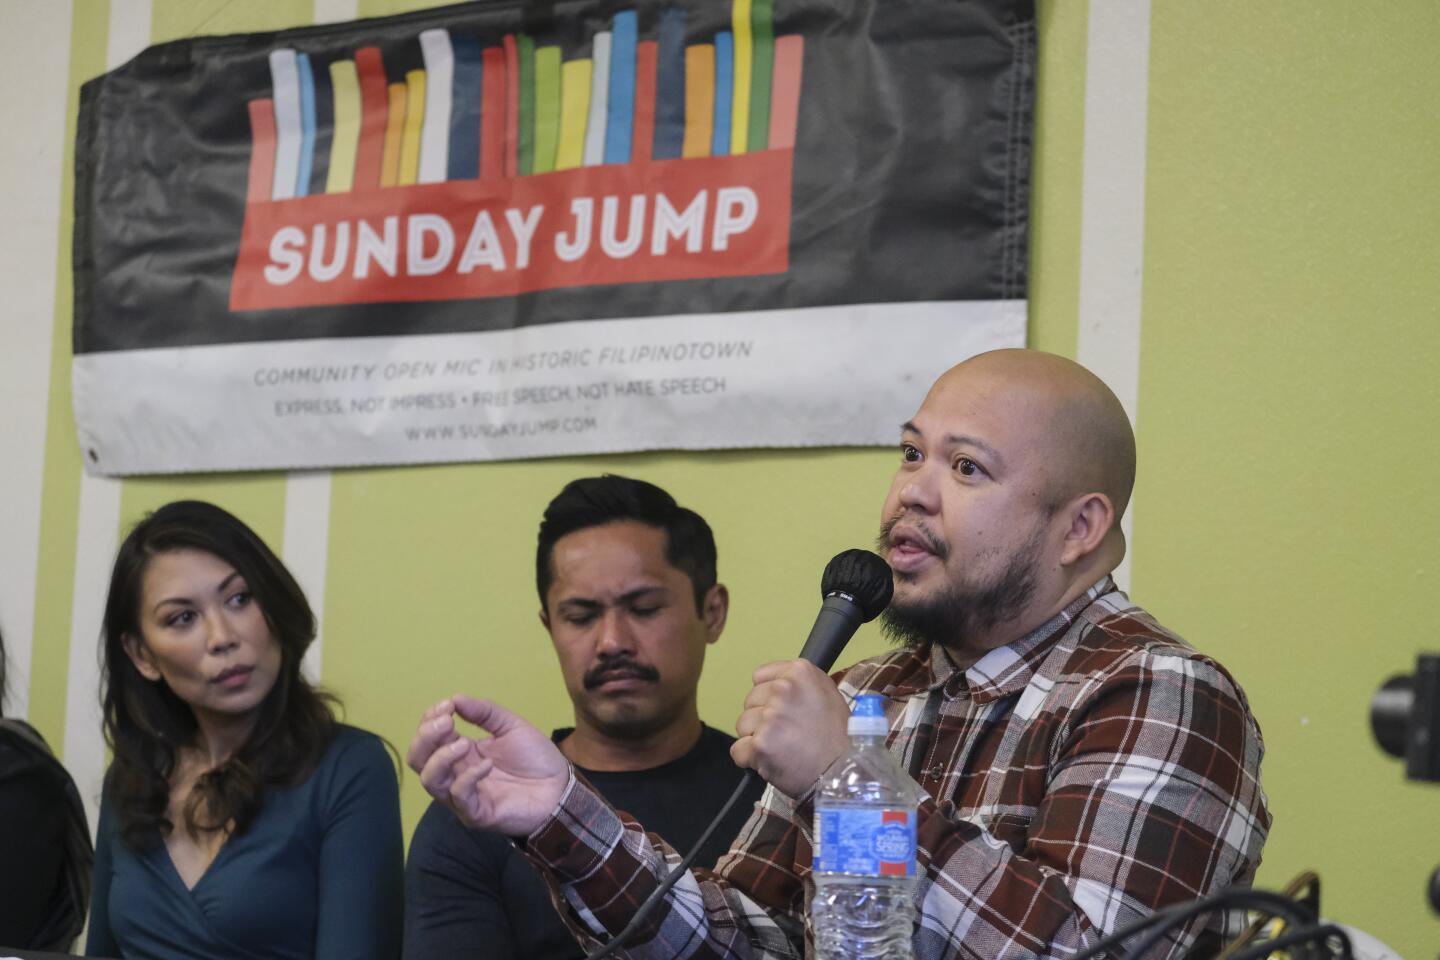 Professor Anthony Ocampo brought a sociological perspective, asking the crowd to think about how families, organizations, churches, countries and societies affect an individual's mental health. He also emphasized the importance of highlighting stories that are often less visible, including the experiences of queer and trans, undocumented, working-class and disabled Filipino Americans.